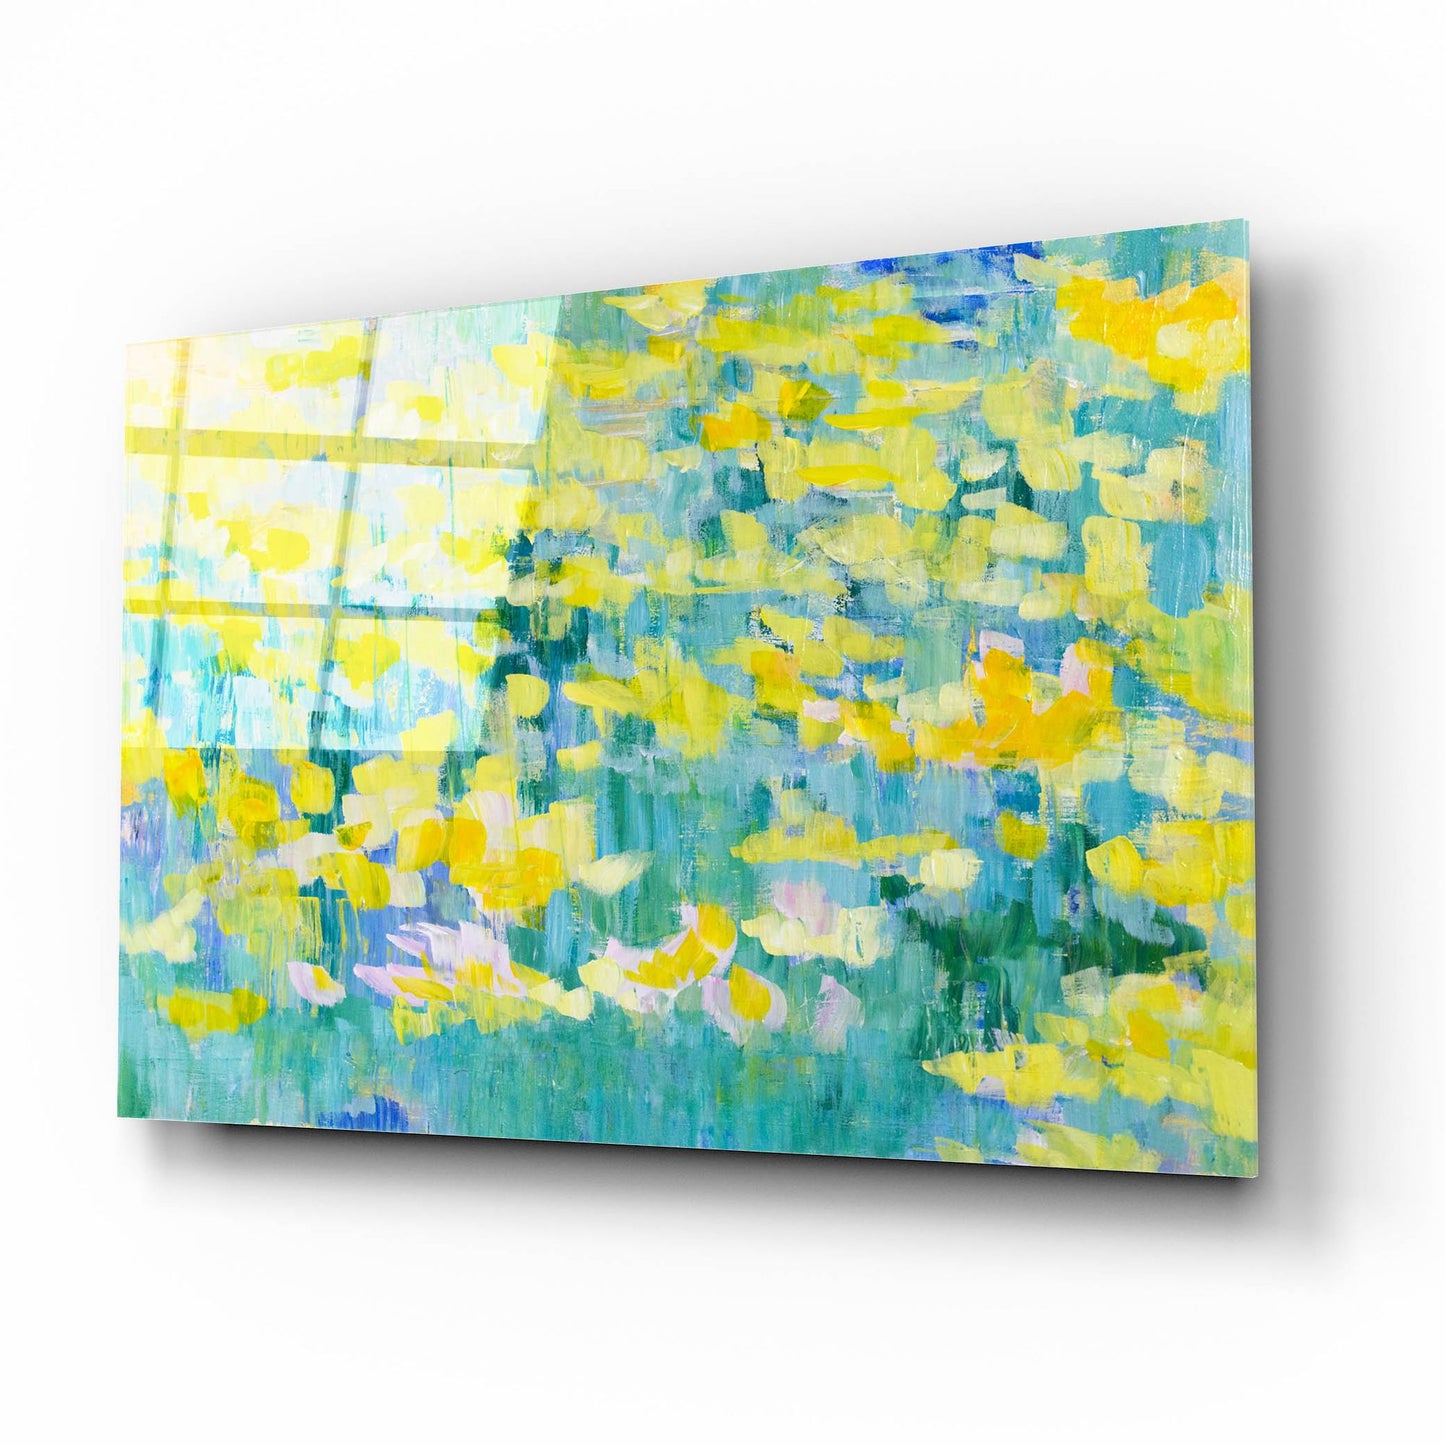 Epic Art 'And They Were All Yellow' by Cassandra Gillens, Acrylic Glass Wall Art,16x12